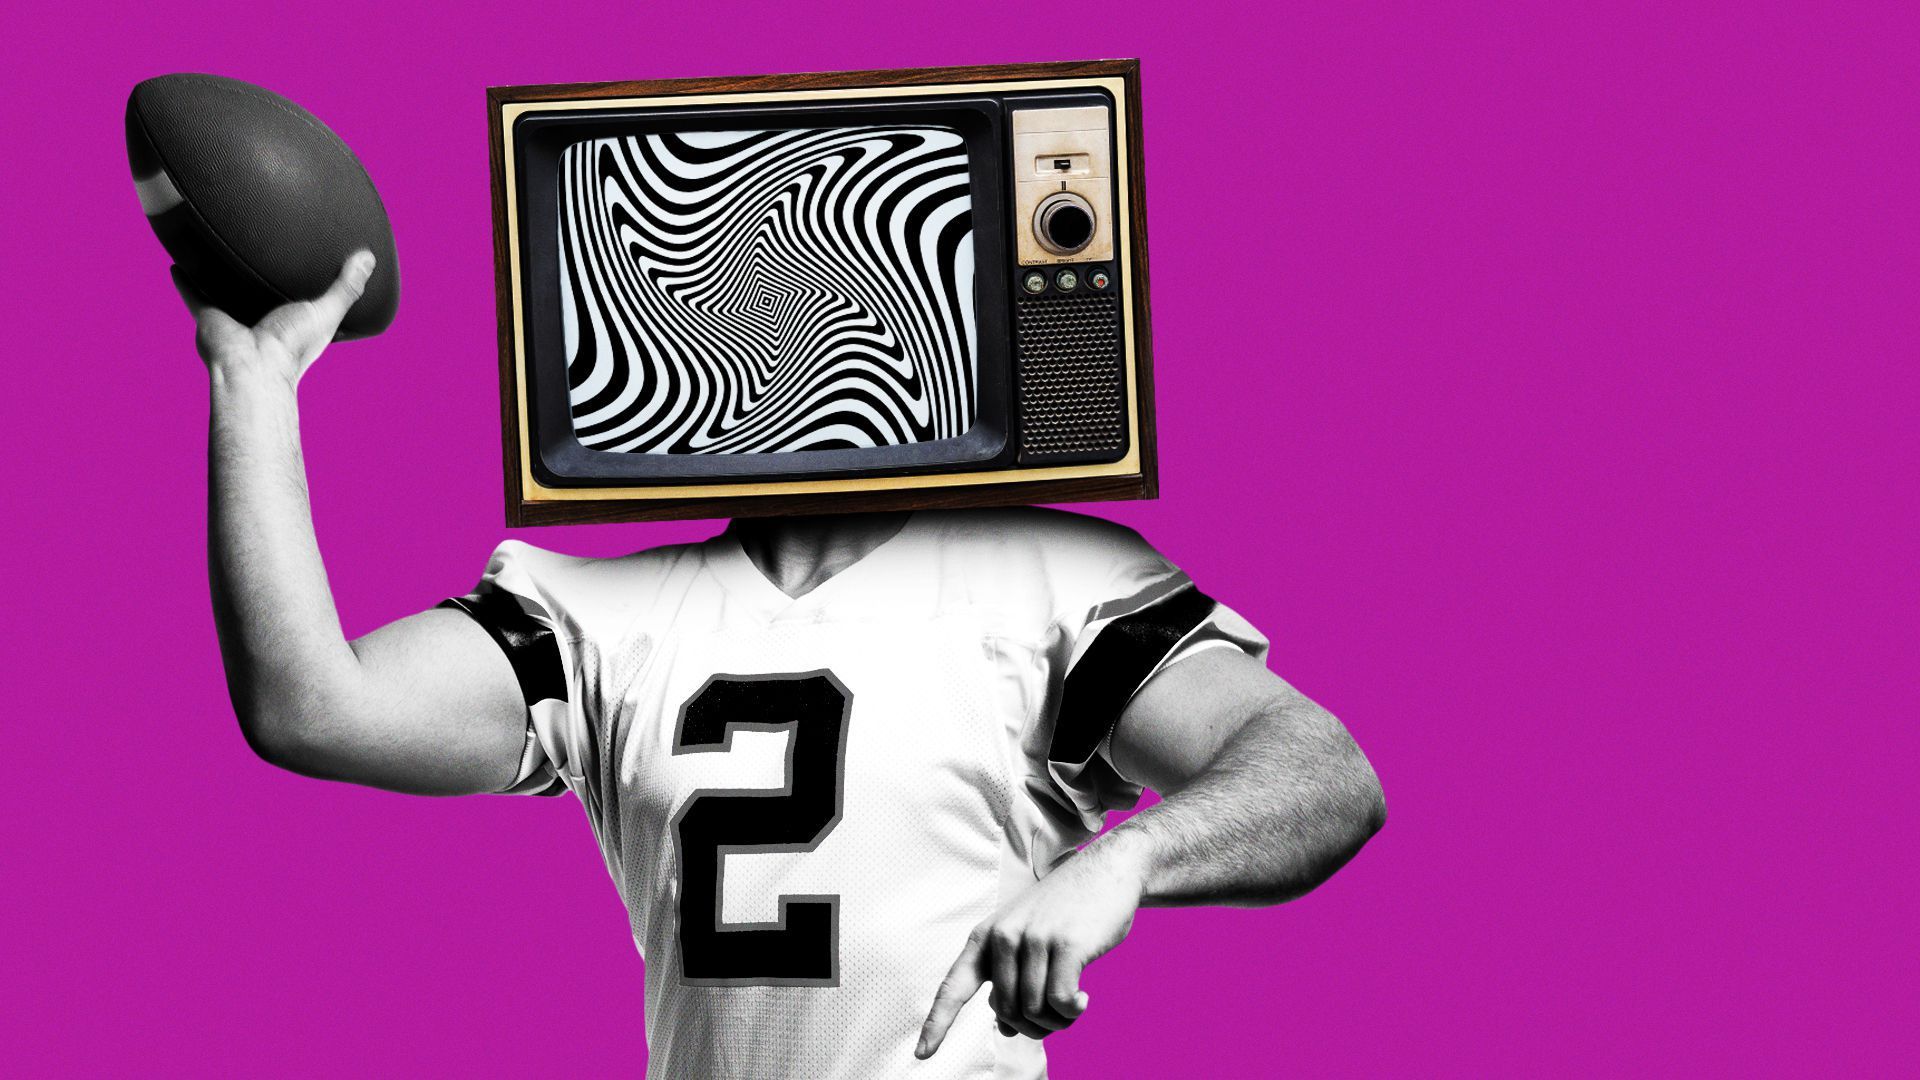 A football player with a TV set for a head with a black and white spiral in the picture